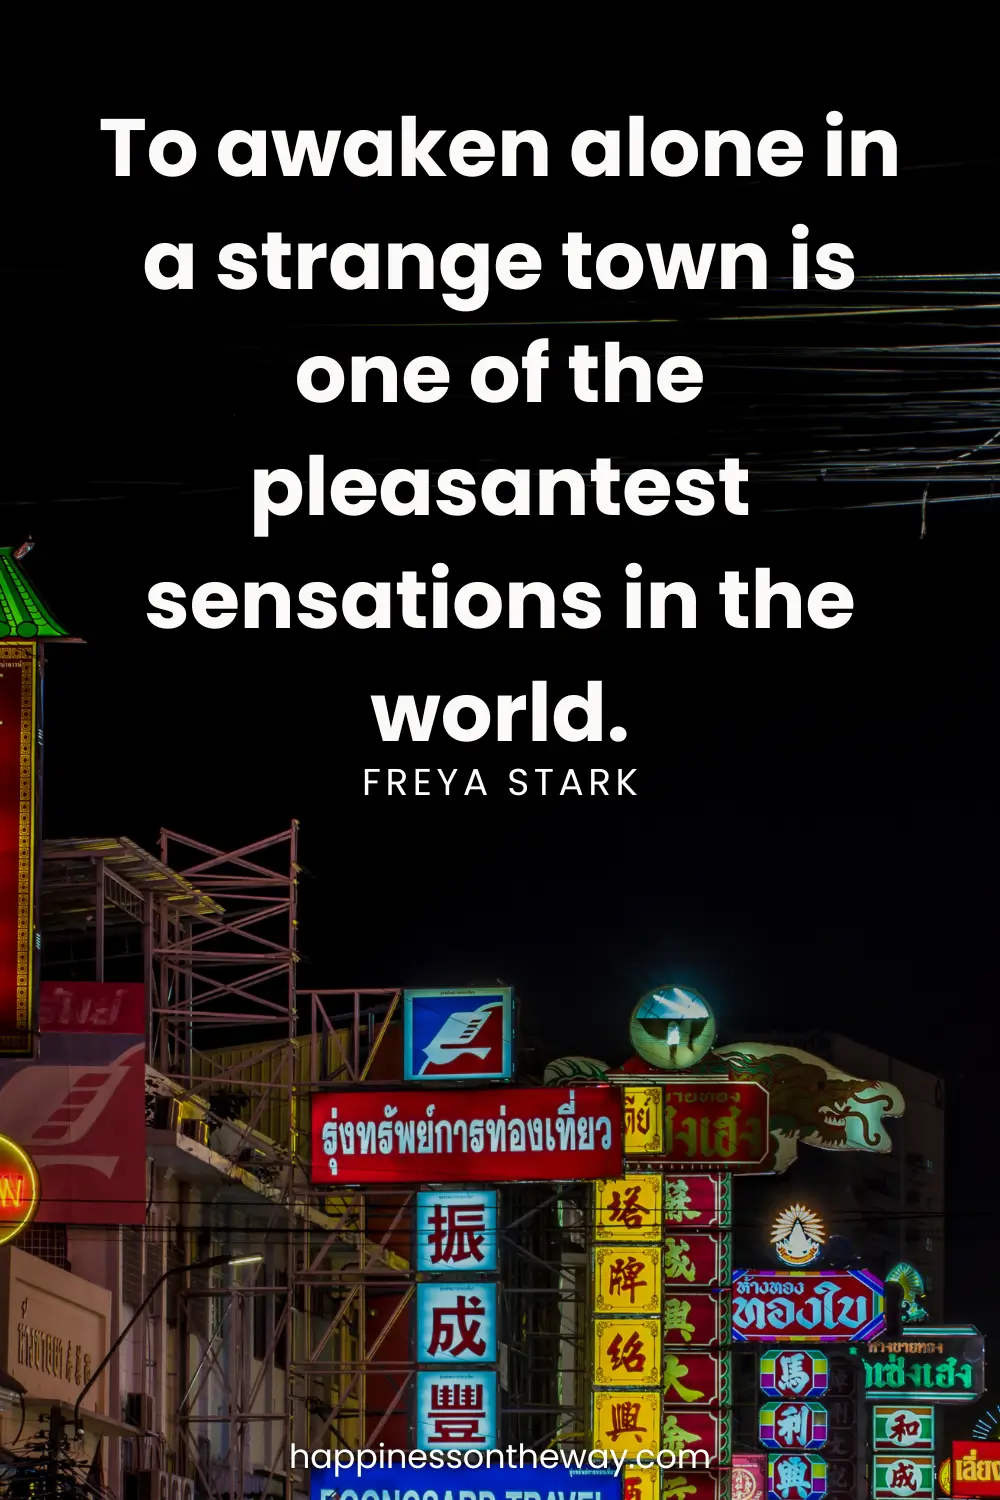 Vibrant street signs at night in an urban setting with the quote 'To awaken alone in a strange town is one of the pleasantest sensations in the world.' by Freya Stark